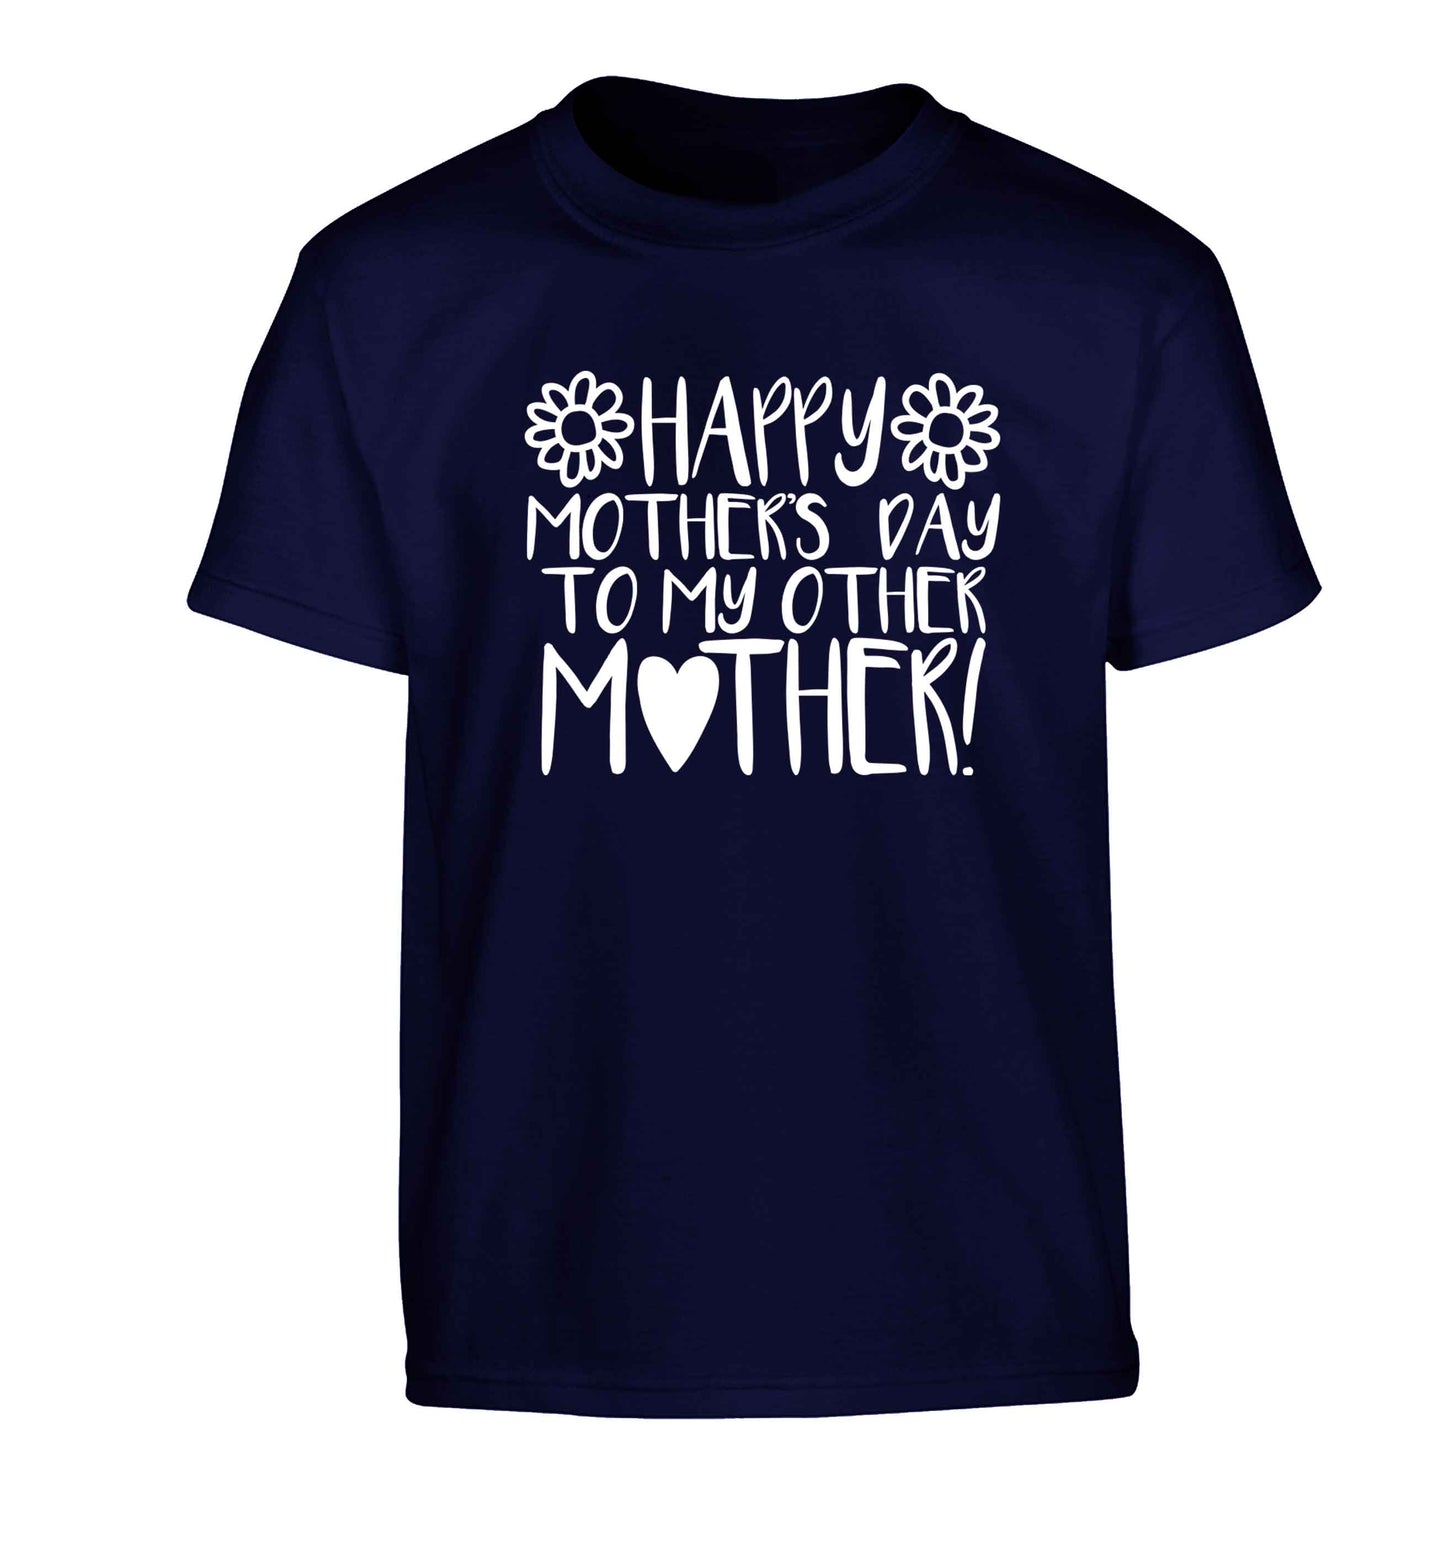 Happy mother's day to my other mother Children's navy Tshirt 12-13 Years